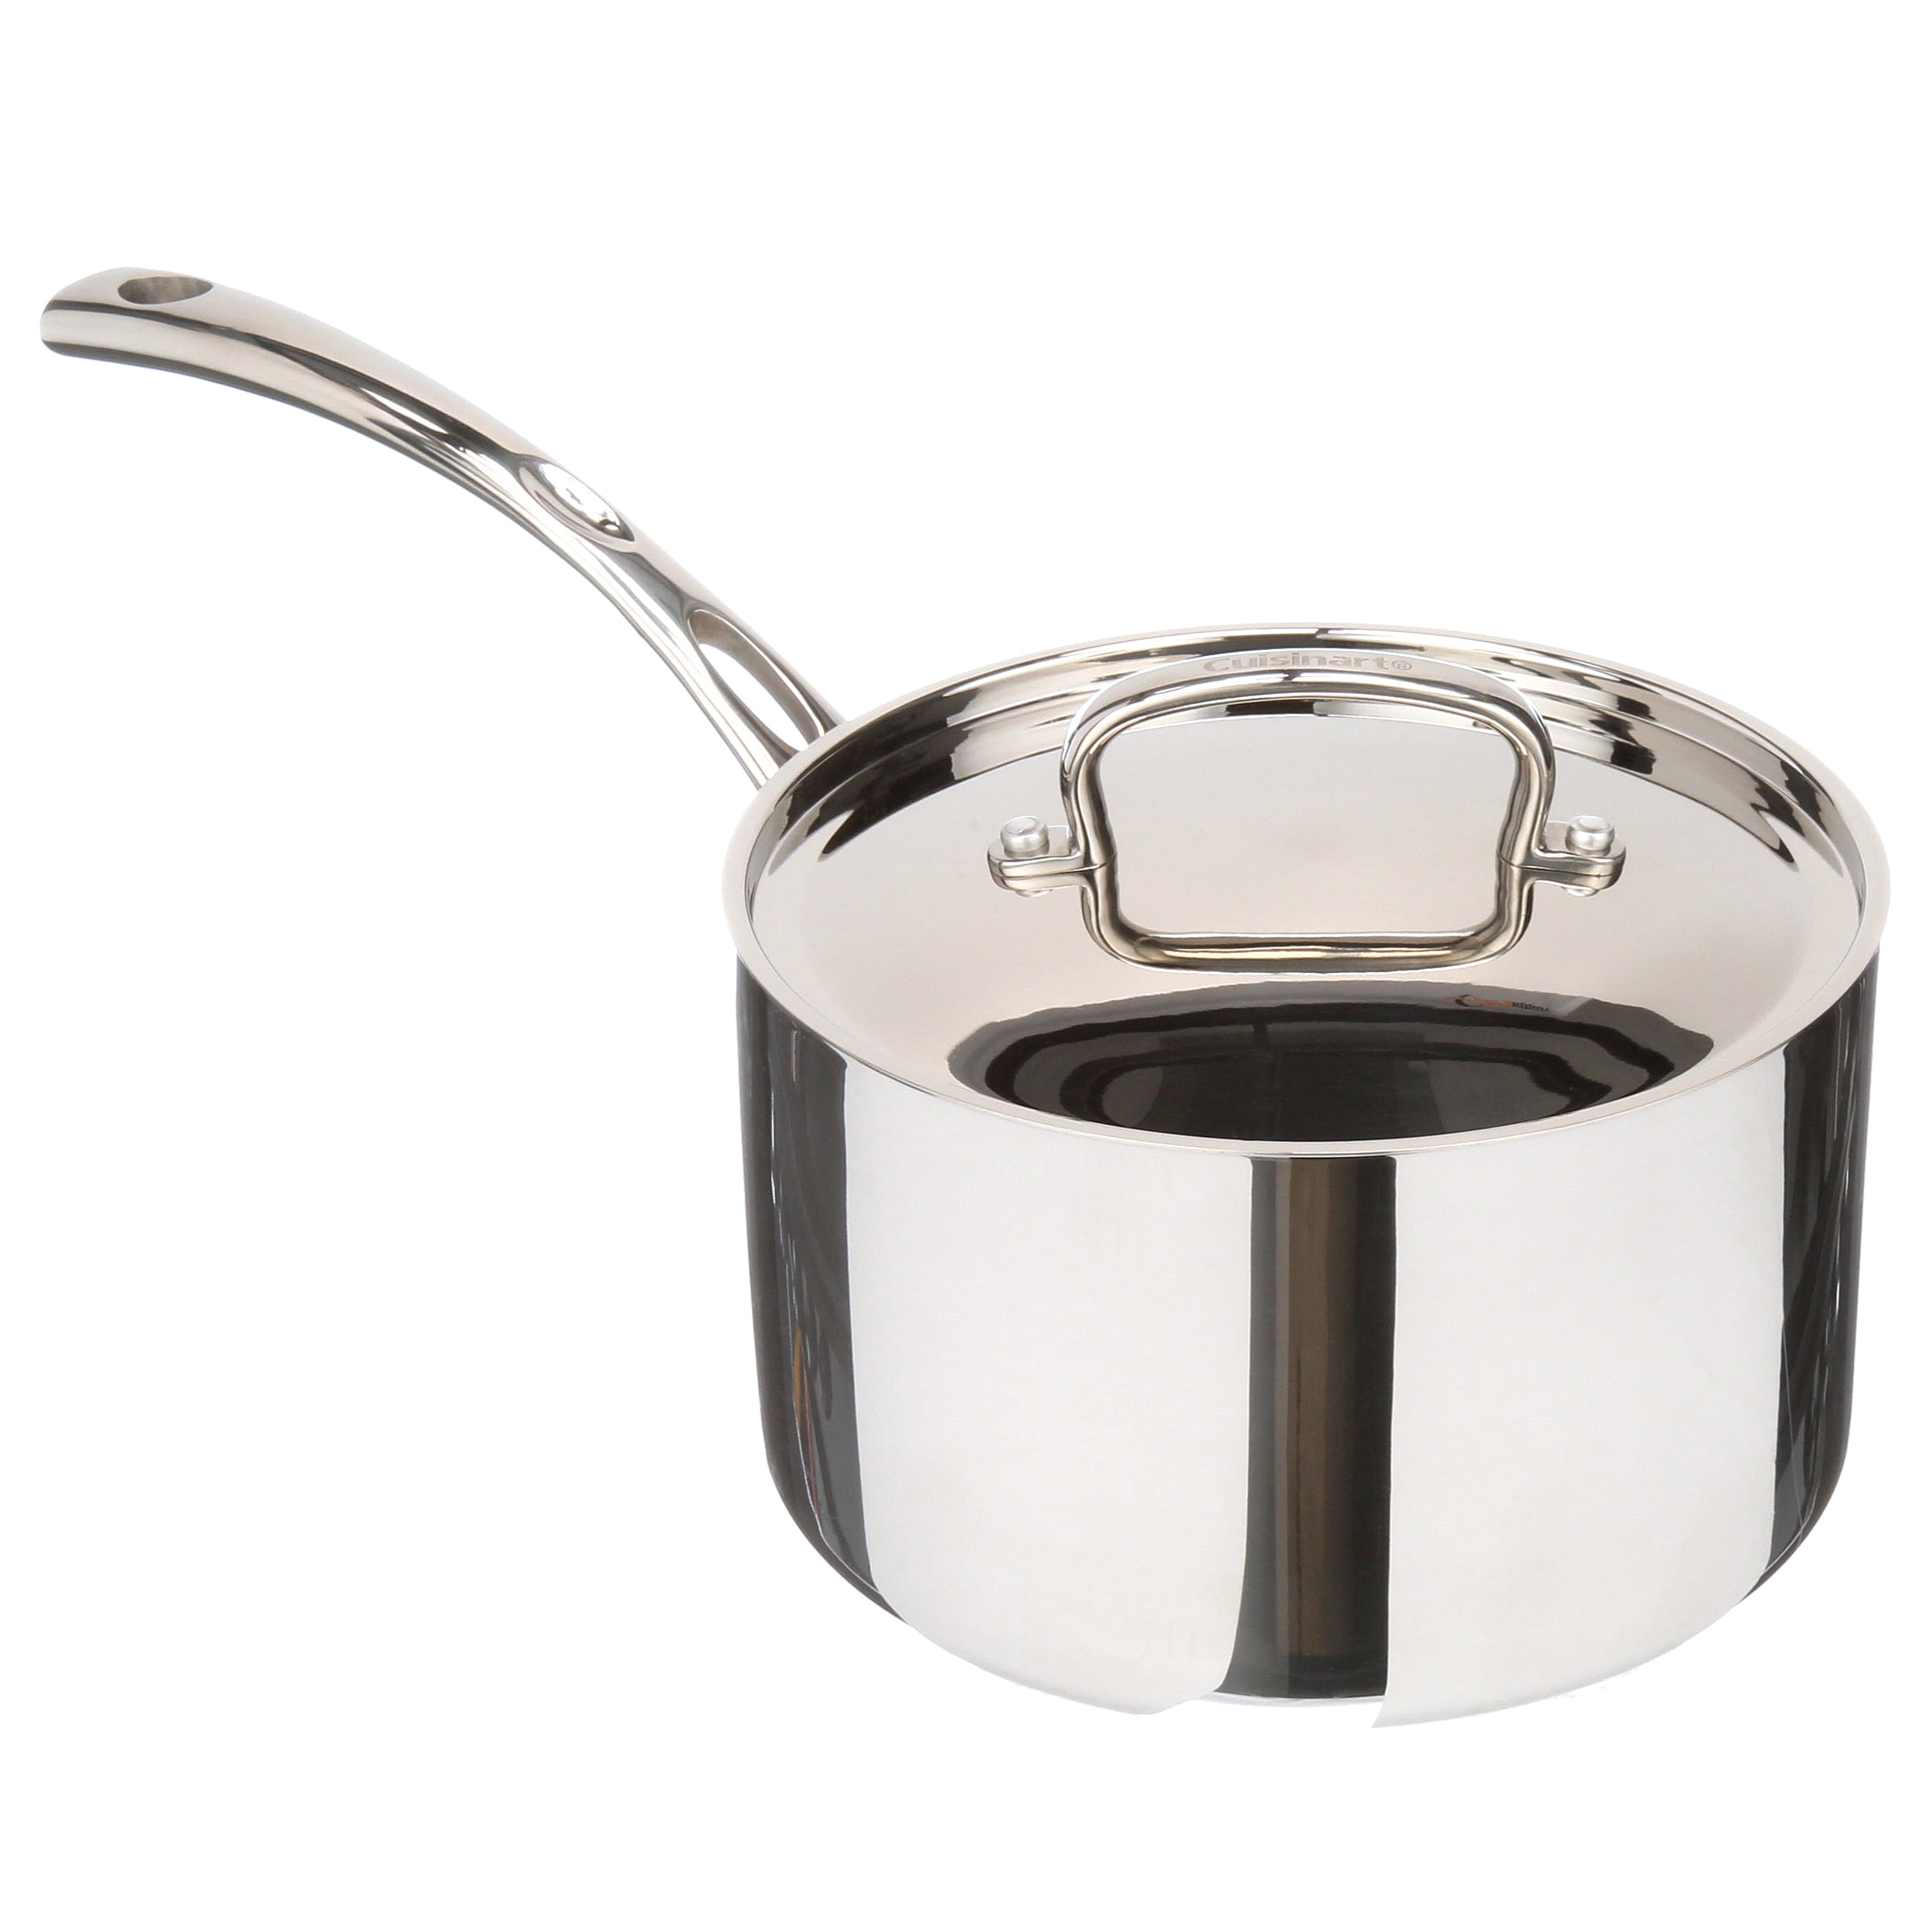 Cuisinart French Classic Tri-Ply Stainless 4.5 Quart Dutch Oven with Cover